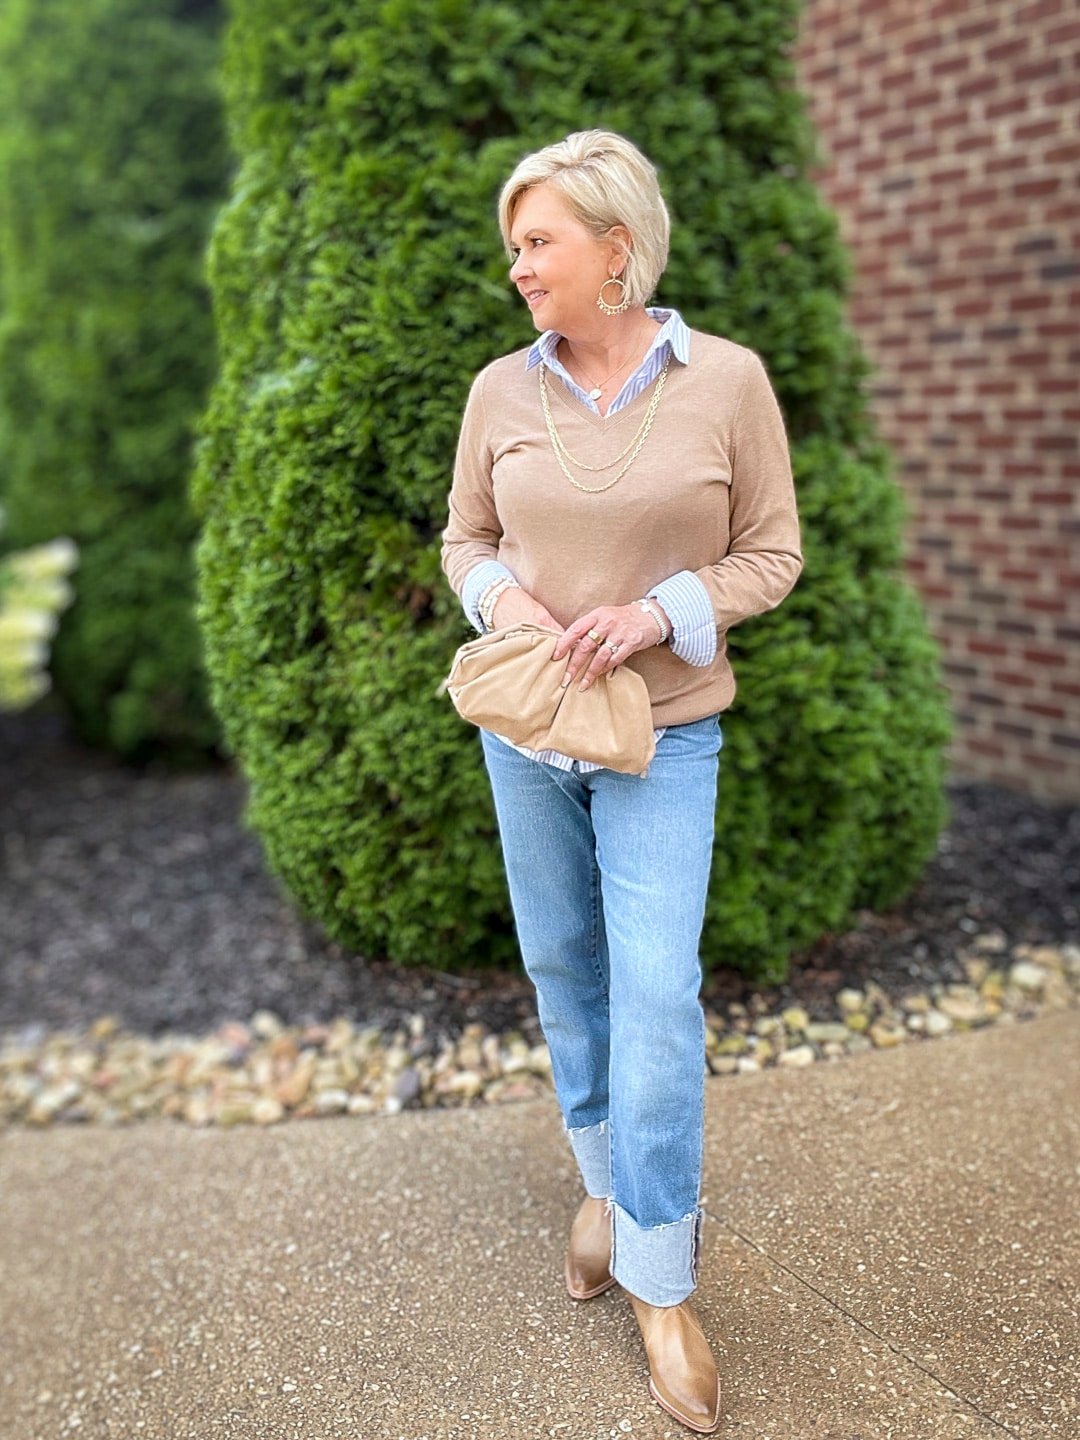 Over 40 Fashion Blogger, Tania Stephens is wearing big cuff jeans from Banana Republic 6